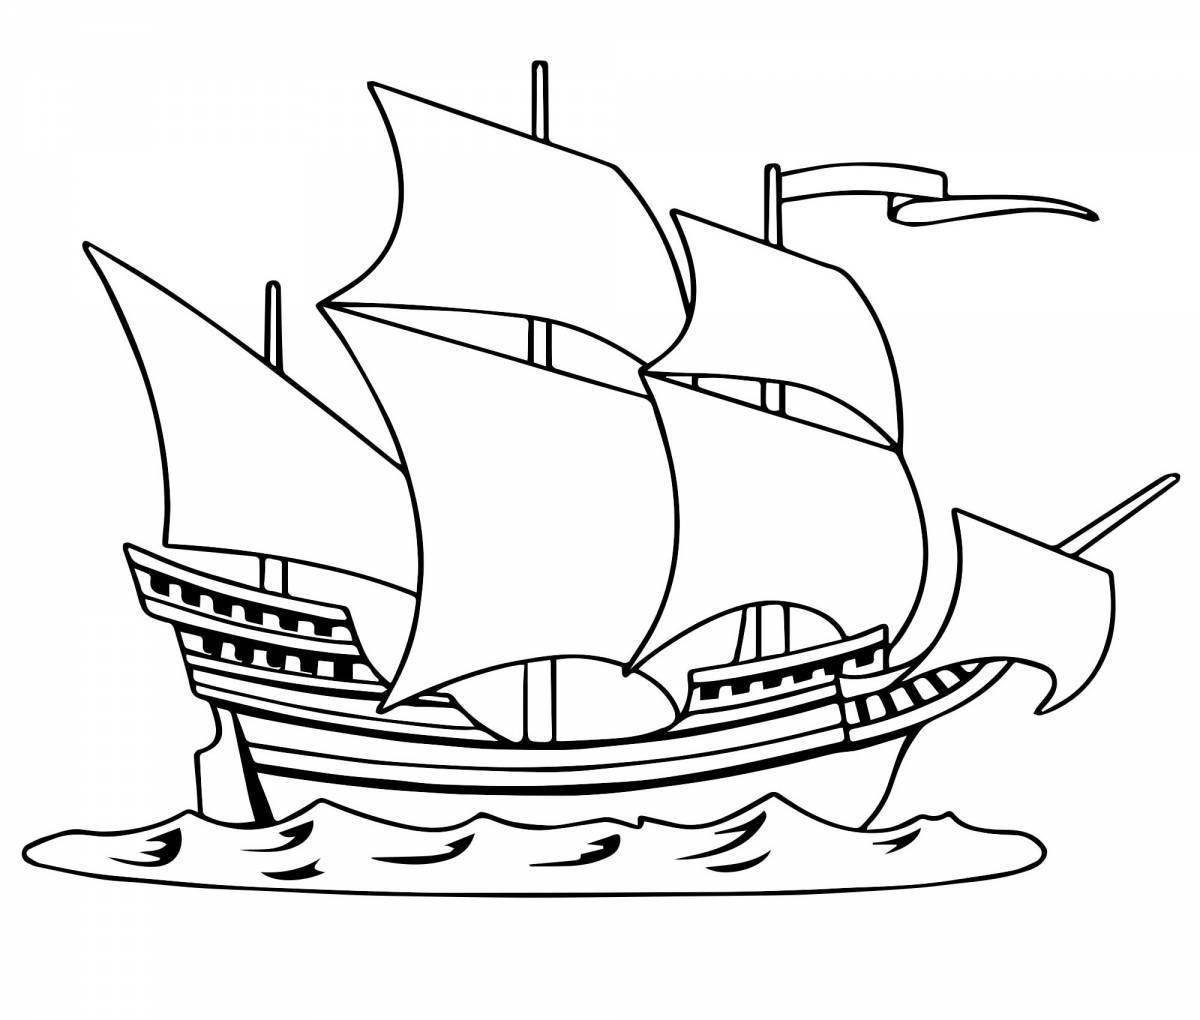 Fantastic ship coloring book for 5-6 year olds